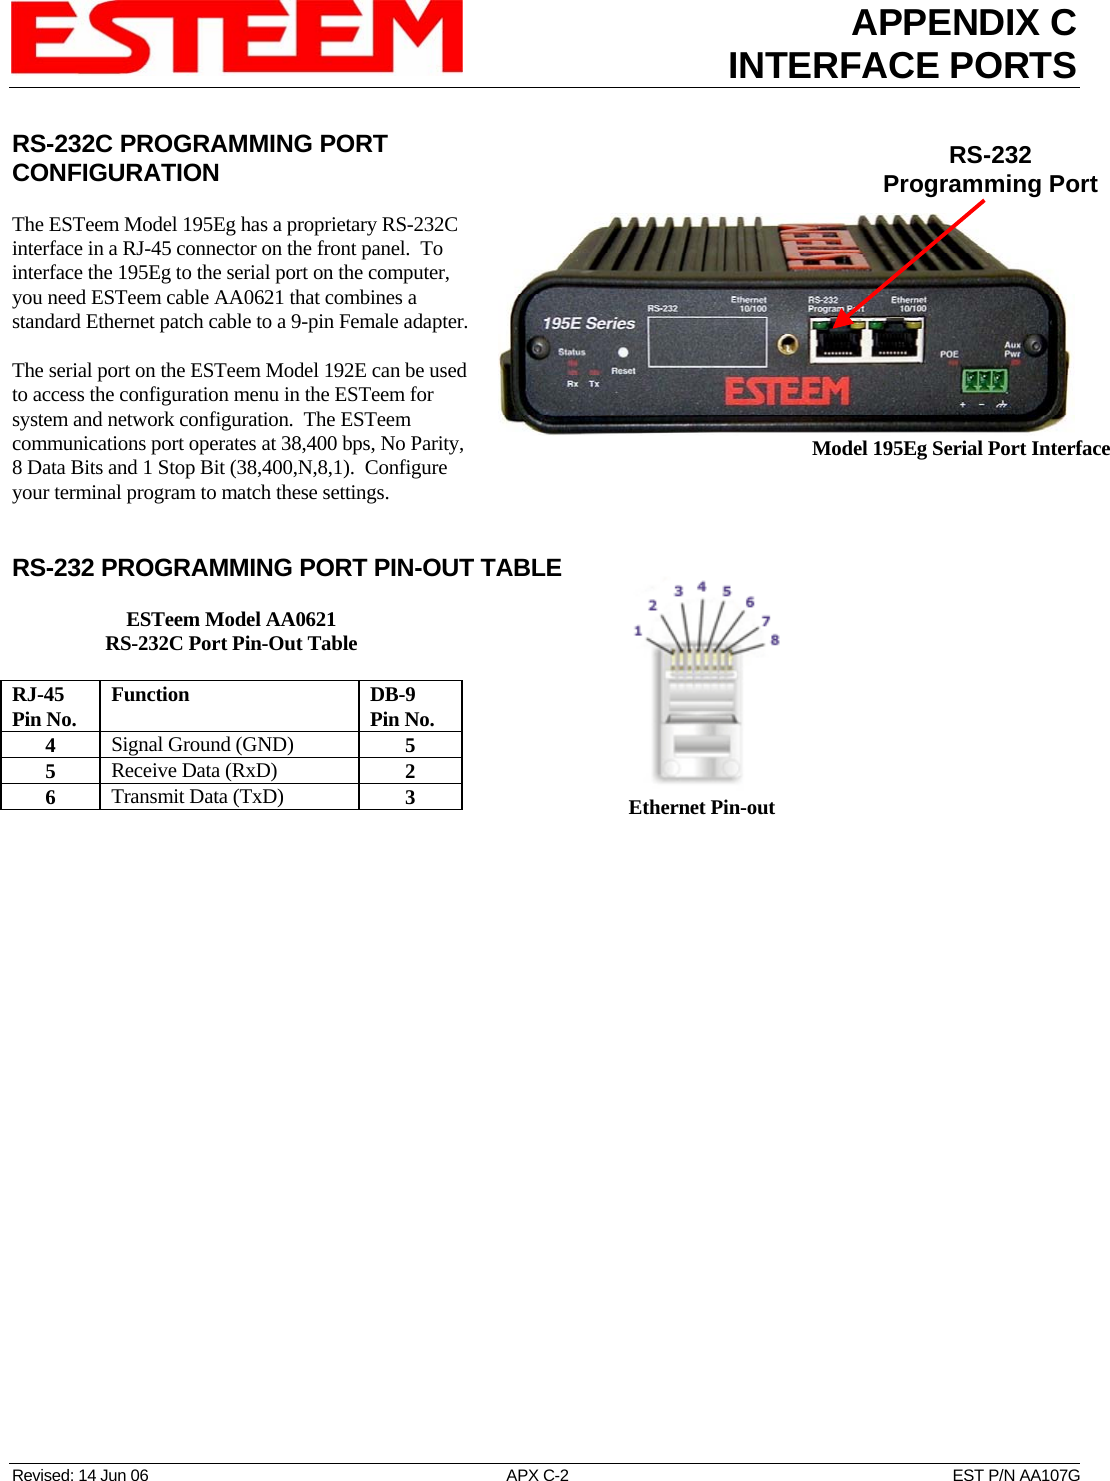 APPENDIX C INTERFACE PORTS   Revised: 14 Jun 06  APX C-2  EST P/N AA107G RS-232C PROGRAMMING PORT CONFIGURATION  RS-232Programming Port Model 195Eg Serial Port Interface The ESTeem Model 195Eg has a proprietary RS-232C interface in a RJ-45 connector on the front panel.  To interface the 195Eg to the serial port on the computer, you need ESTeem cable AA0621 that combines a standard Ethernet patch cable to a 9-pin Female adapter.  The serial port on the ESTeem Model 192E can be used to access the configuration menu in the ESTeem for system and network configuration.  The ESTeem communications port operates at 38,400 bps, No Parity, 8 Data Bits and 1 Stop Bit (38,400,N,8,1).  Configure your terminal program to match these settings.   RS-232 PROGRAMMING PORT PIN-OUT TABLE  Ethernet Pin-out ESTeem Model AA0621 RS-232C Port Pin-Out Table  RJ-45 Pin No.  Function  DB-9 Pin No. 4  Signal Ground (GND)  5 5  Receive Data (RxD)  2 6  Transmit Data (TxD)  3    